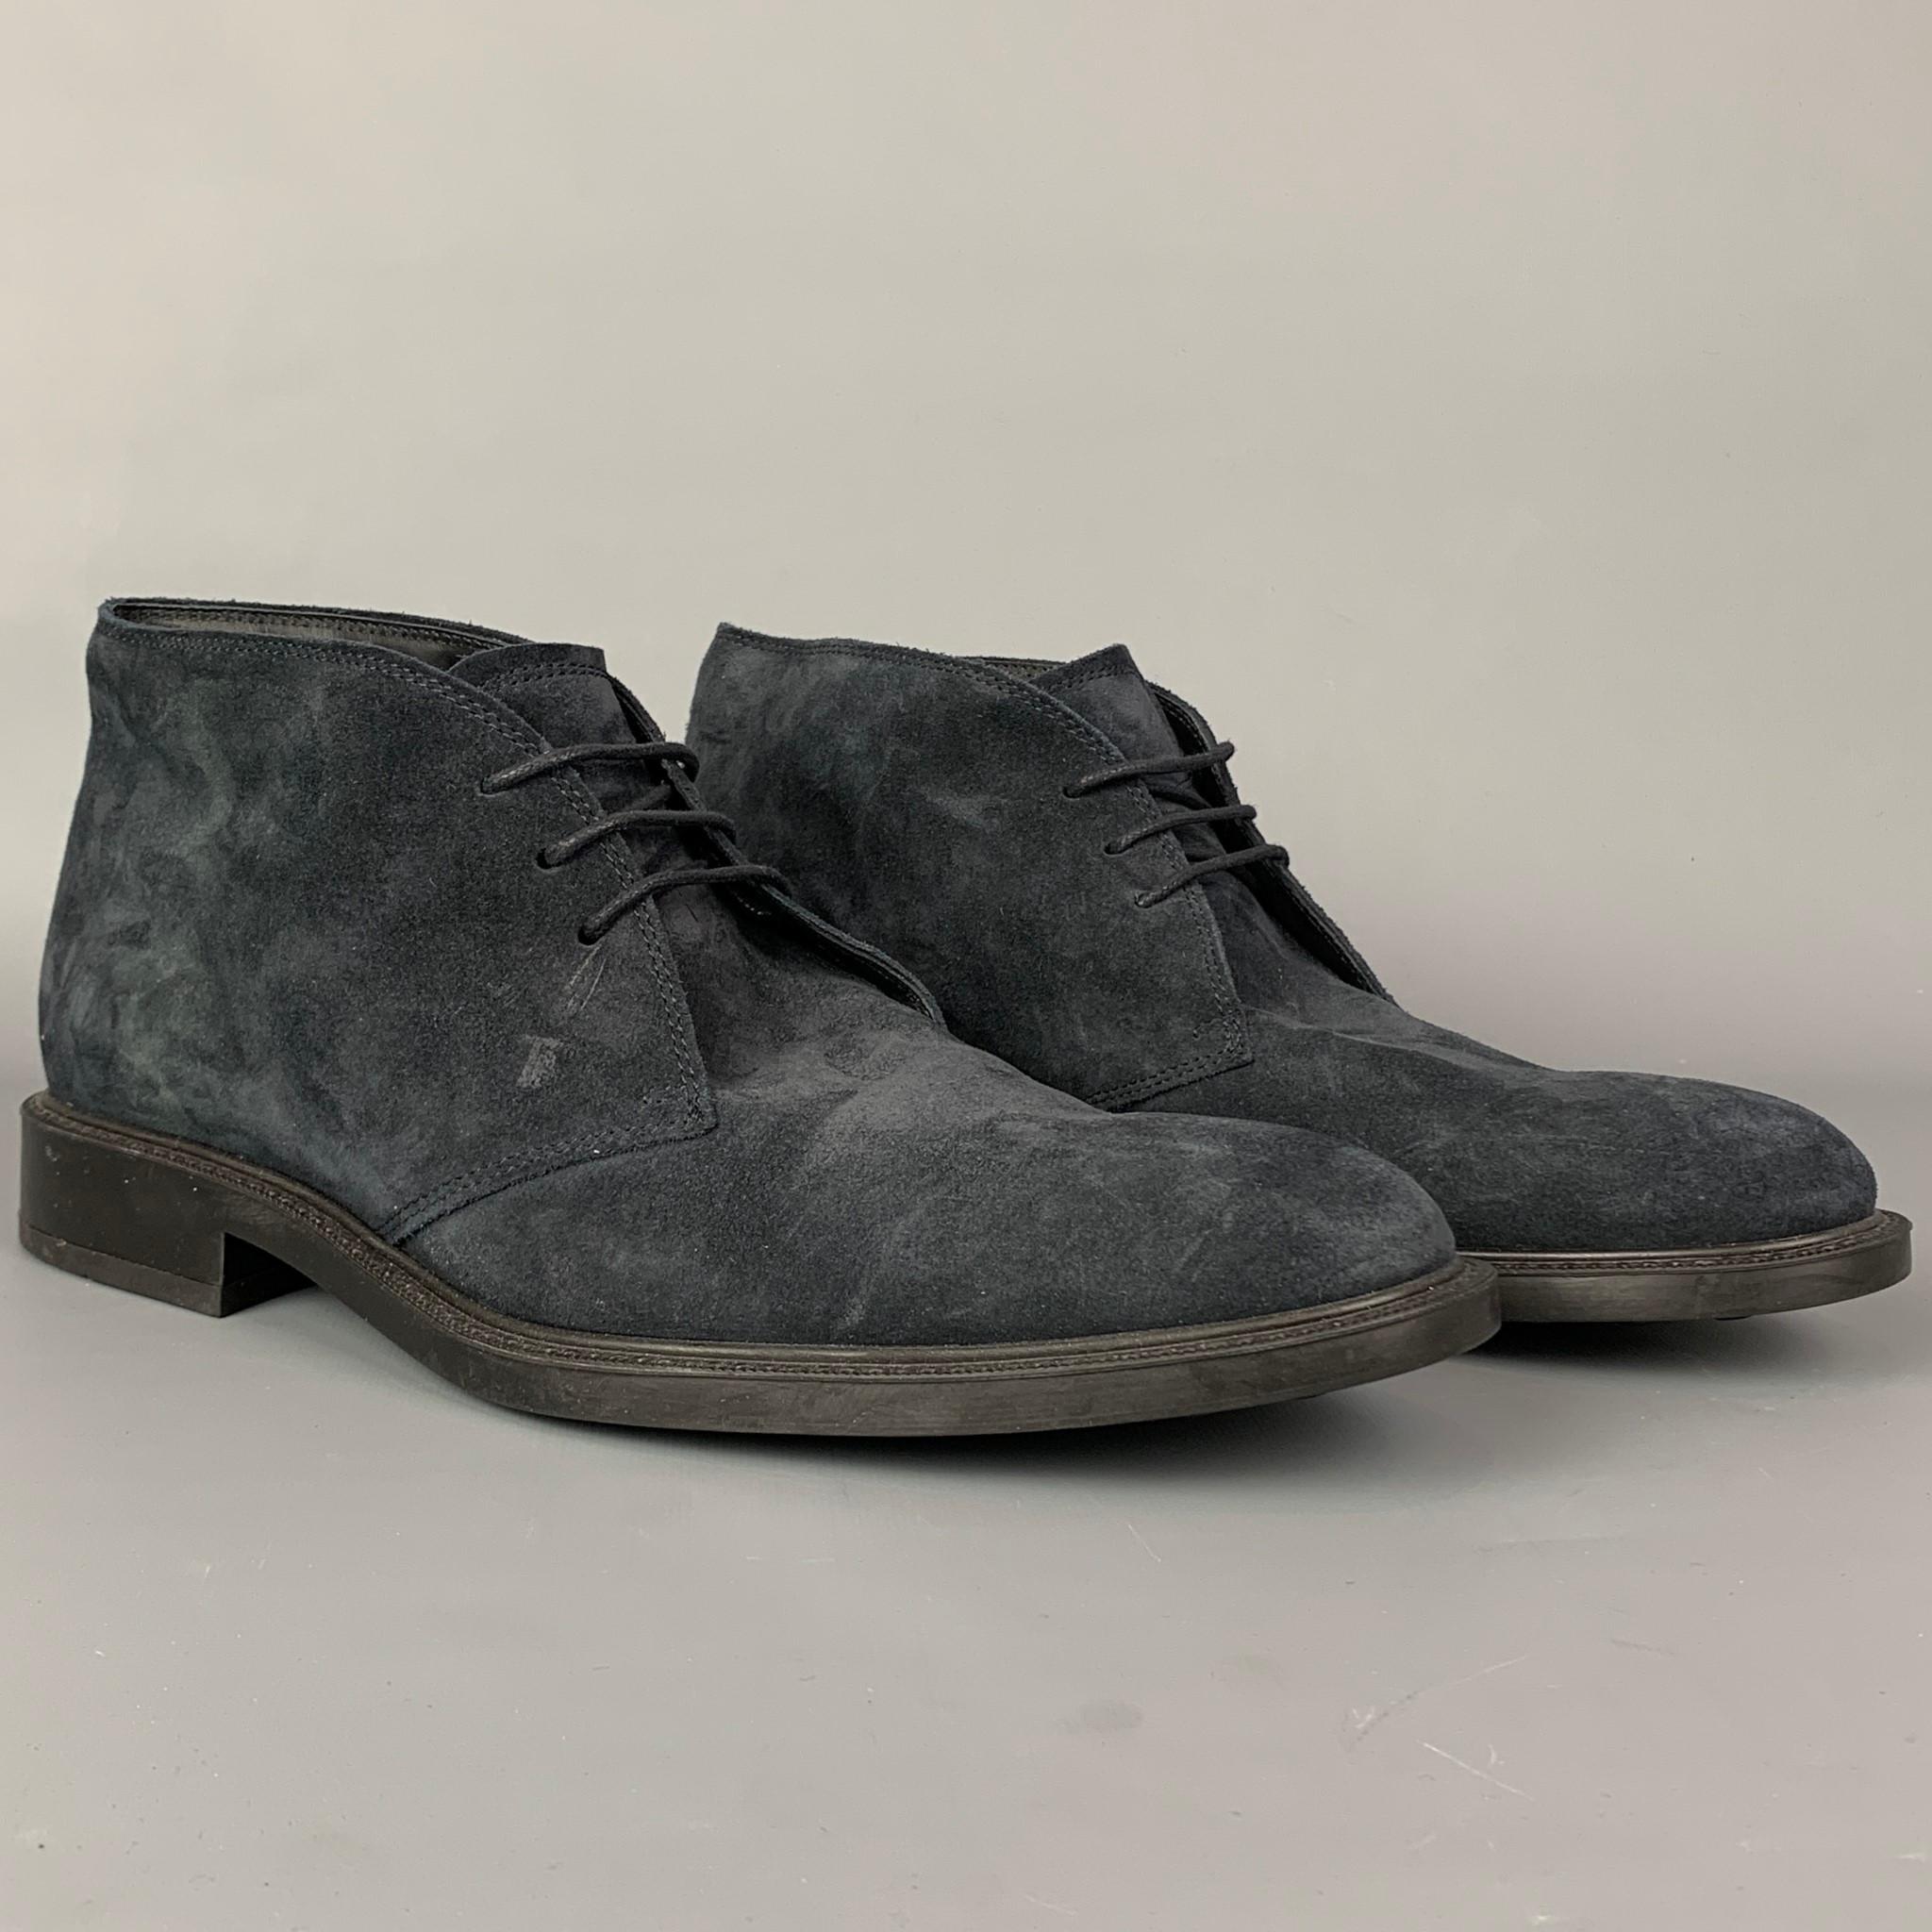 TOD'S boots comes in a navy suede featuring a chukka style, cap toe, rubber sole, and a lace up closure. Made in Italy.

Very Good Pre-Owned Condition.
Marked: 10

Measurements:

Length: 12.5 in.
Width: 4 in.
Height: 4 in. 

SKU: 109944
Category: